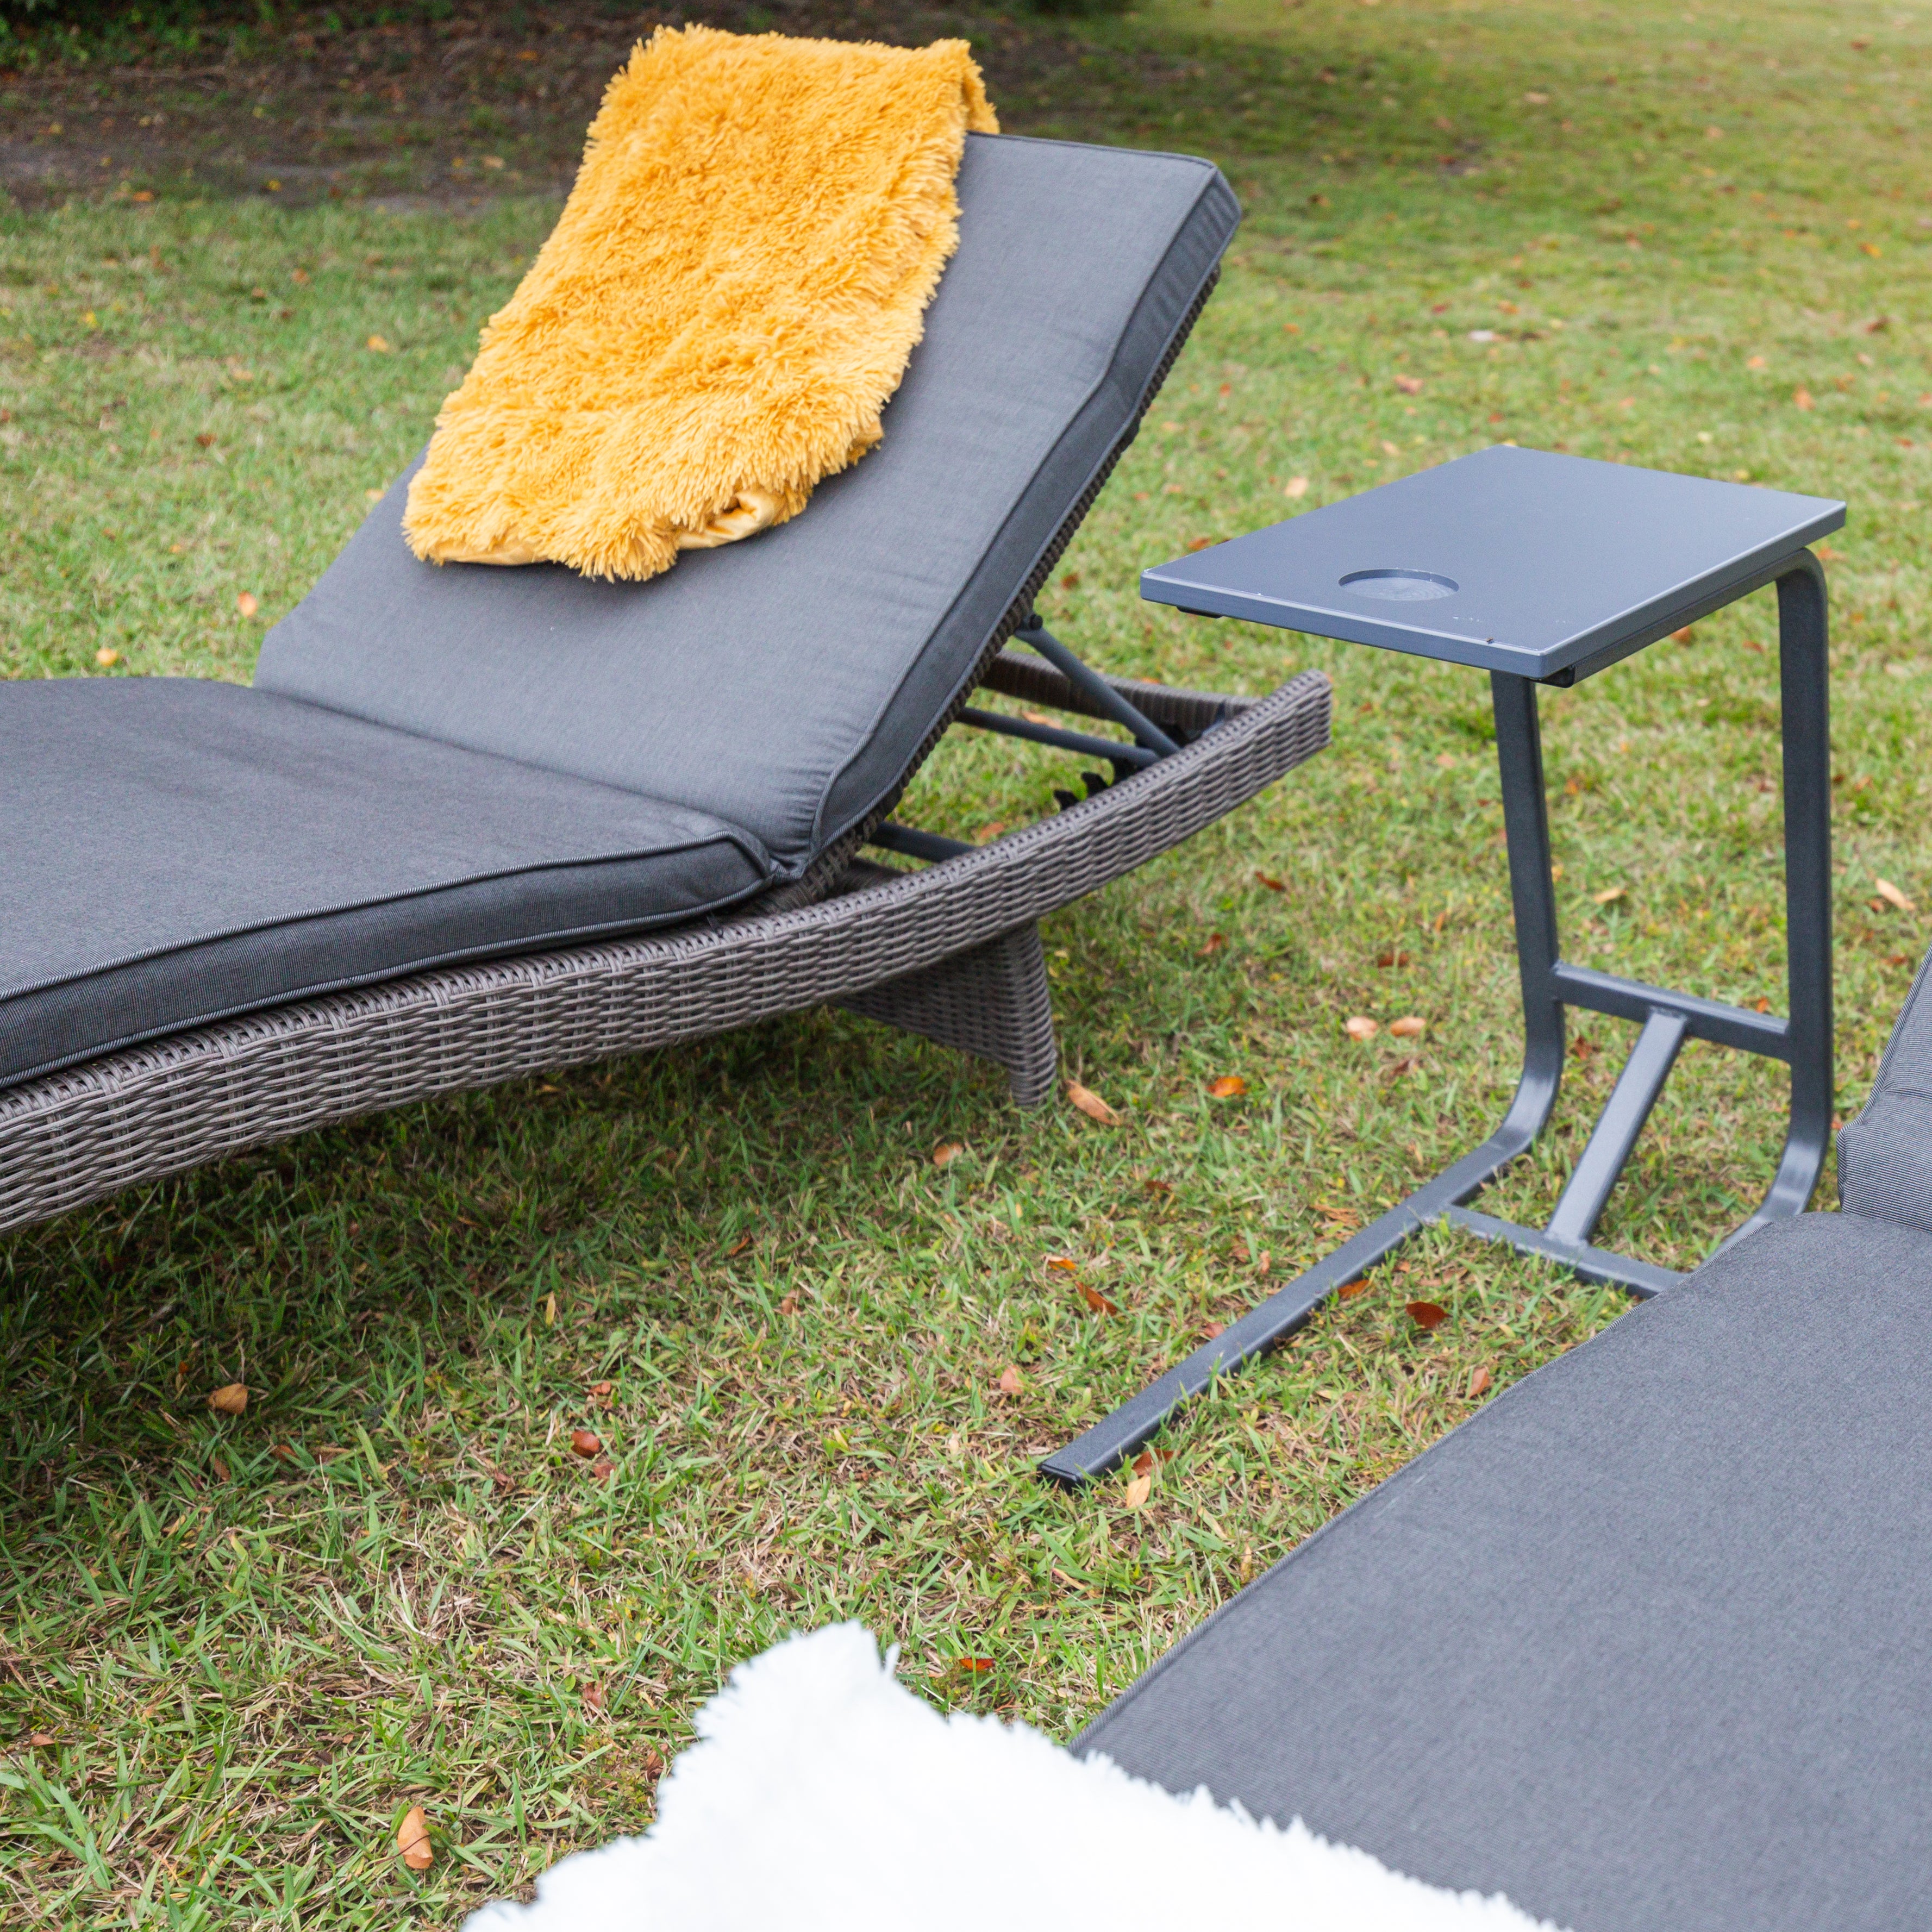 Beautifully crafted, the KETTLER Palma Lounger is made with a sturdy aluminum frame, which is intricately covered with hand-woven synthetic wicker. The wicker is waterproof and UV resistant, so you can keep the lounger outdoor all year round. The Palma Collection boasts a wide choice of stylish garden furniture including dining sets, modular lounge sets and sun loungers, so you can dine and lounge outdoors in comfort. Aluminum powder coated frame with full circumference welds